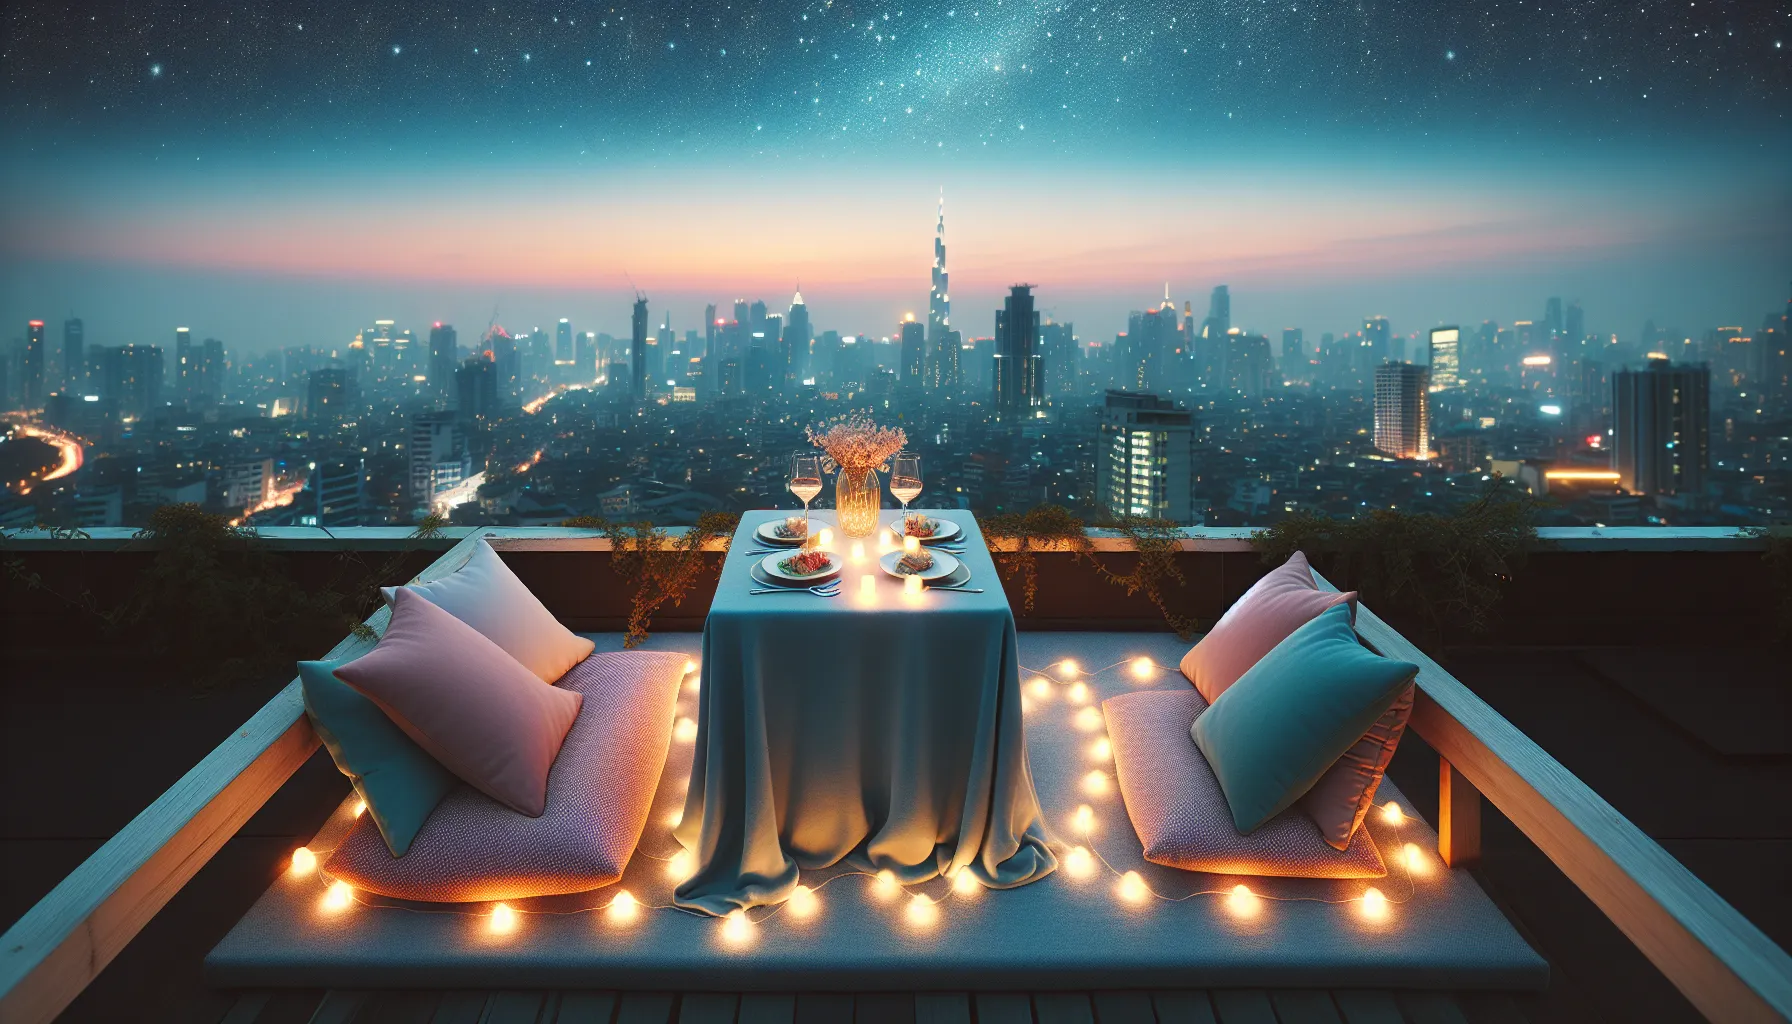 <strong>Where the city meets the stars,</strong> discover a rooftop rendezvous that turns a simple meal into an enchanting evening of connection.